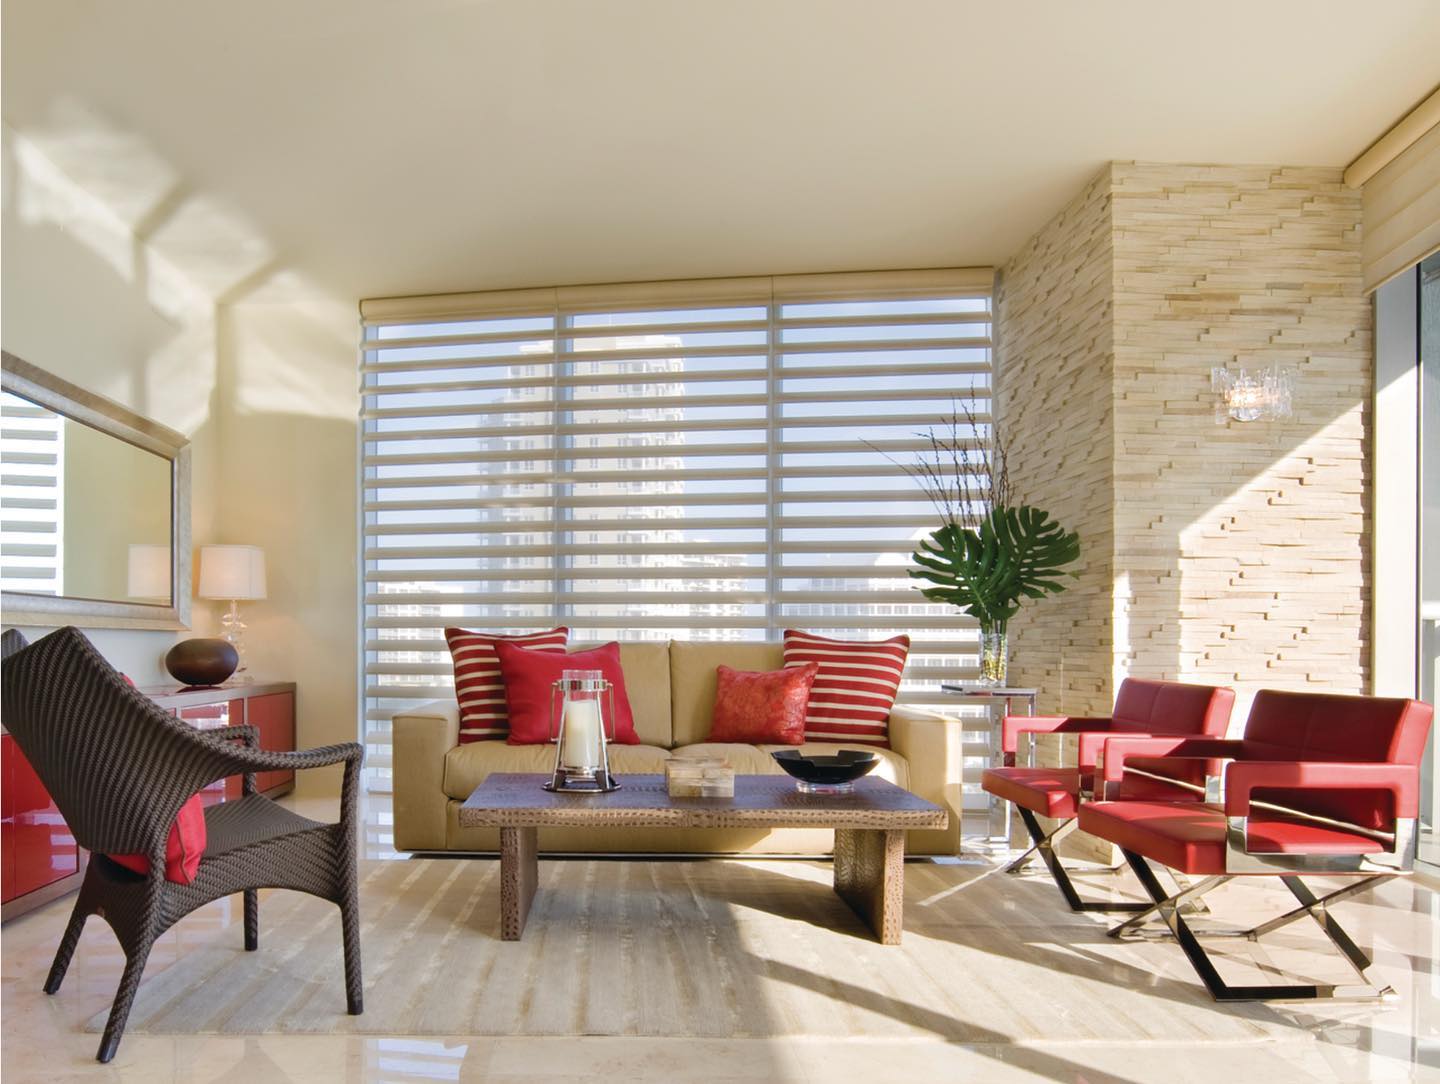 Shades add functionality and character to the living room.